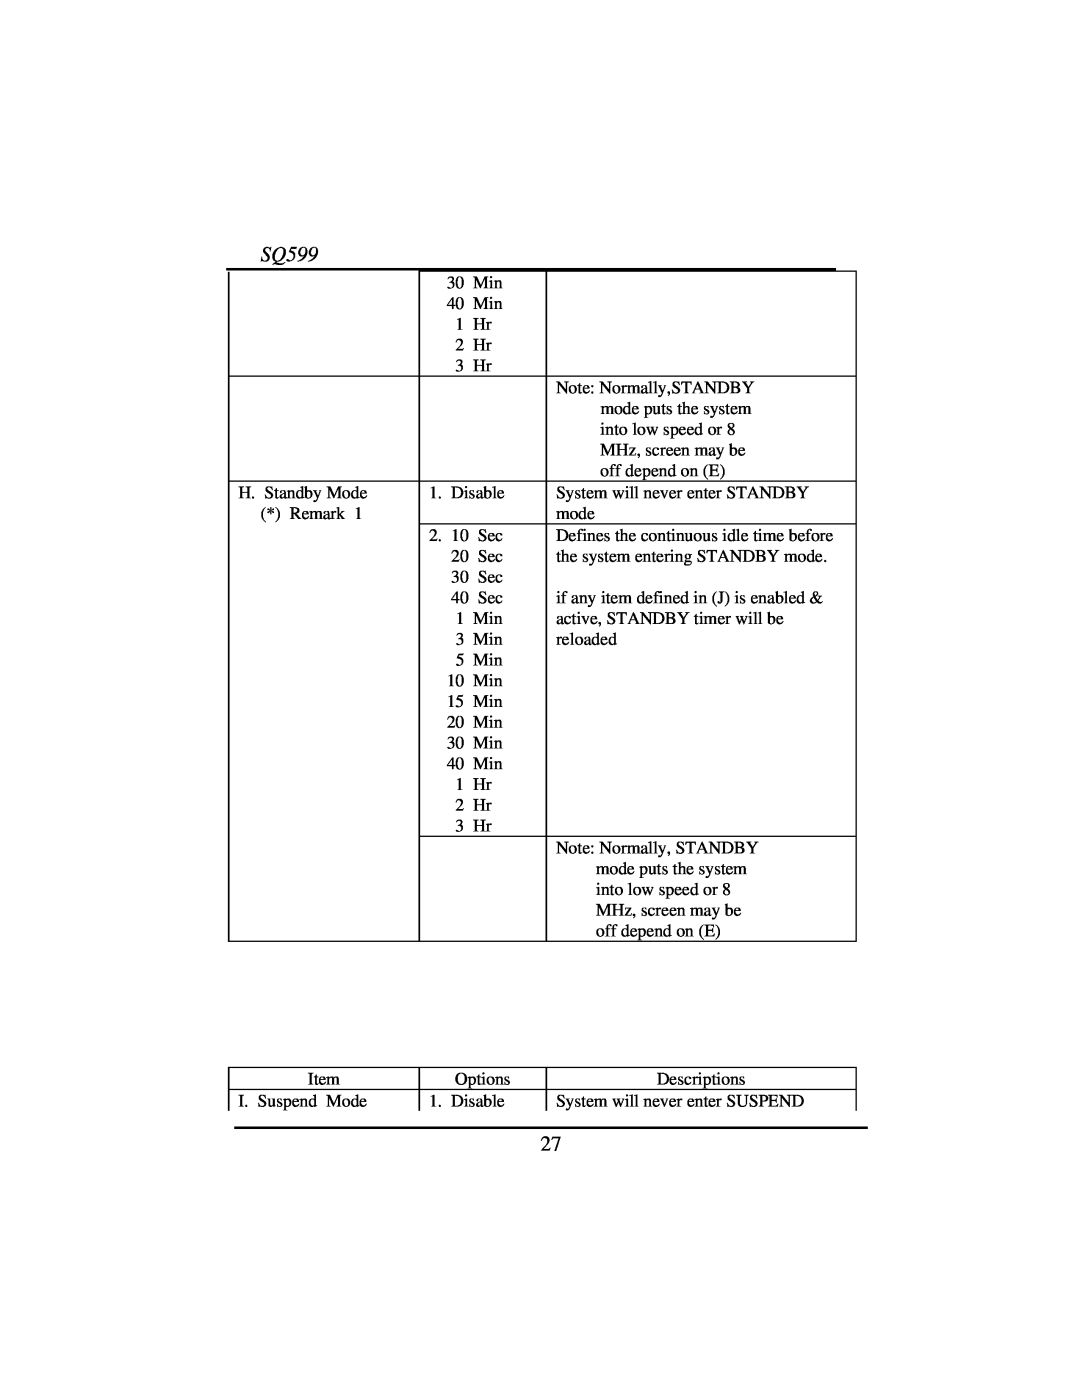 Intel SQ599 manual Note Normally,STANDBY 